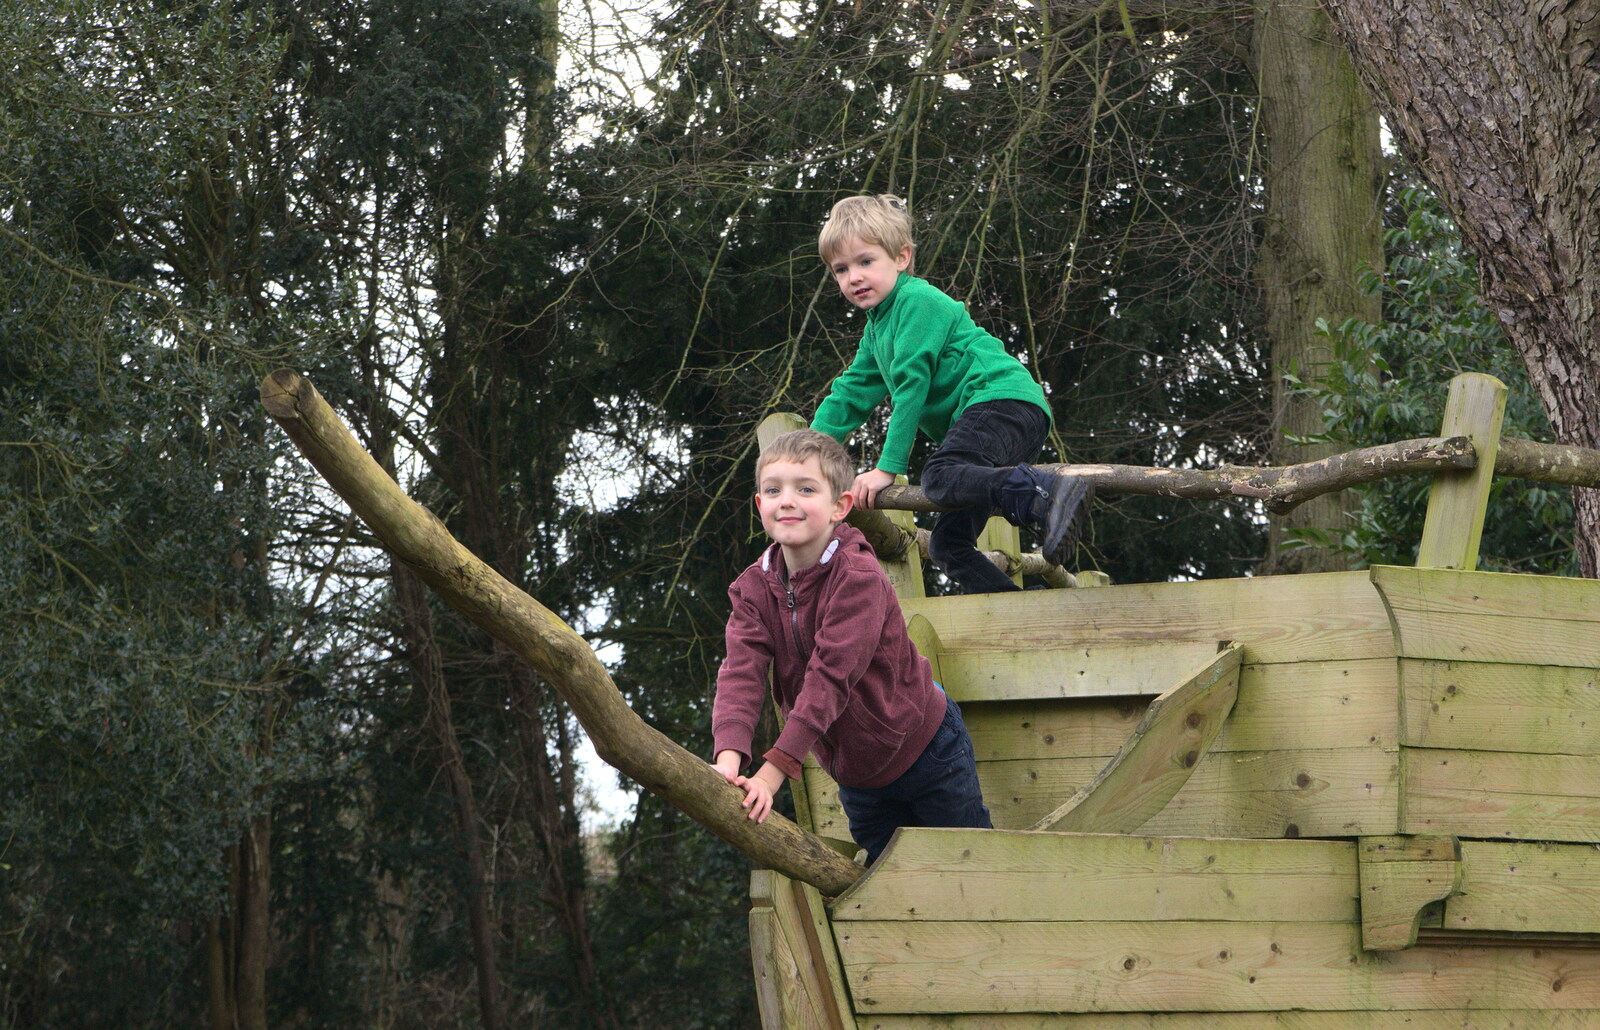 Fred and Harry on the bow of the ship from A Winter's Walk, Thrandeston, Suffolk - 5th February 2017